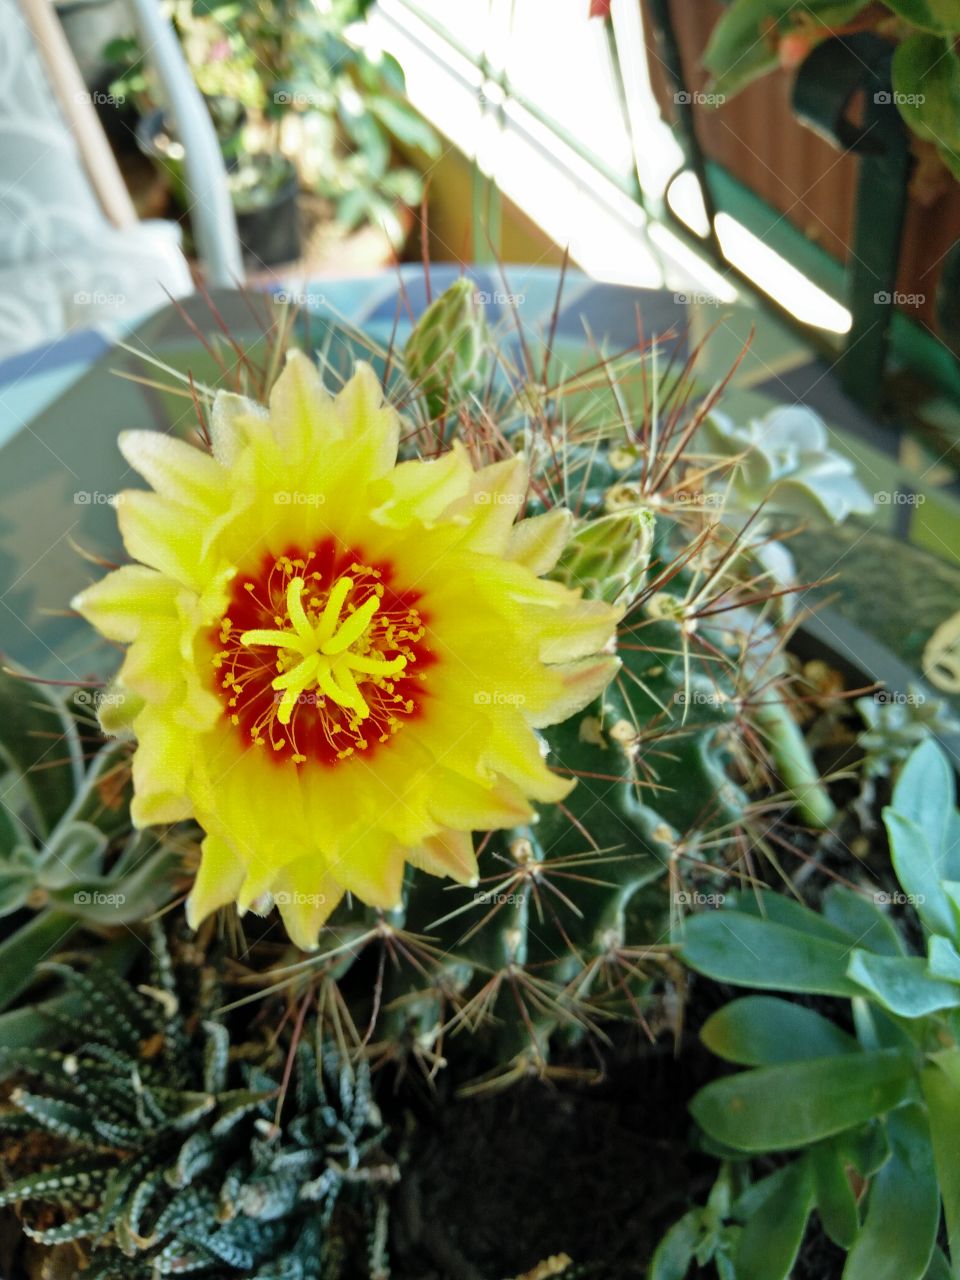 a closeup view of an amazing and colorful yellow cactus flower in a garden